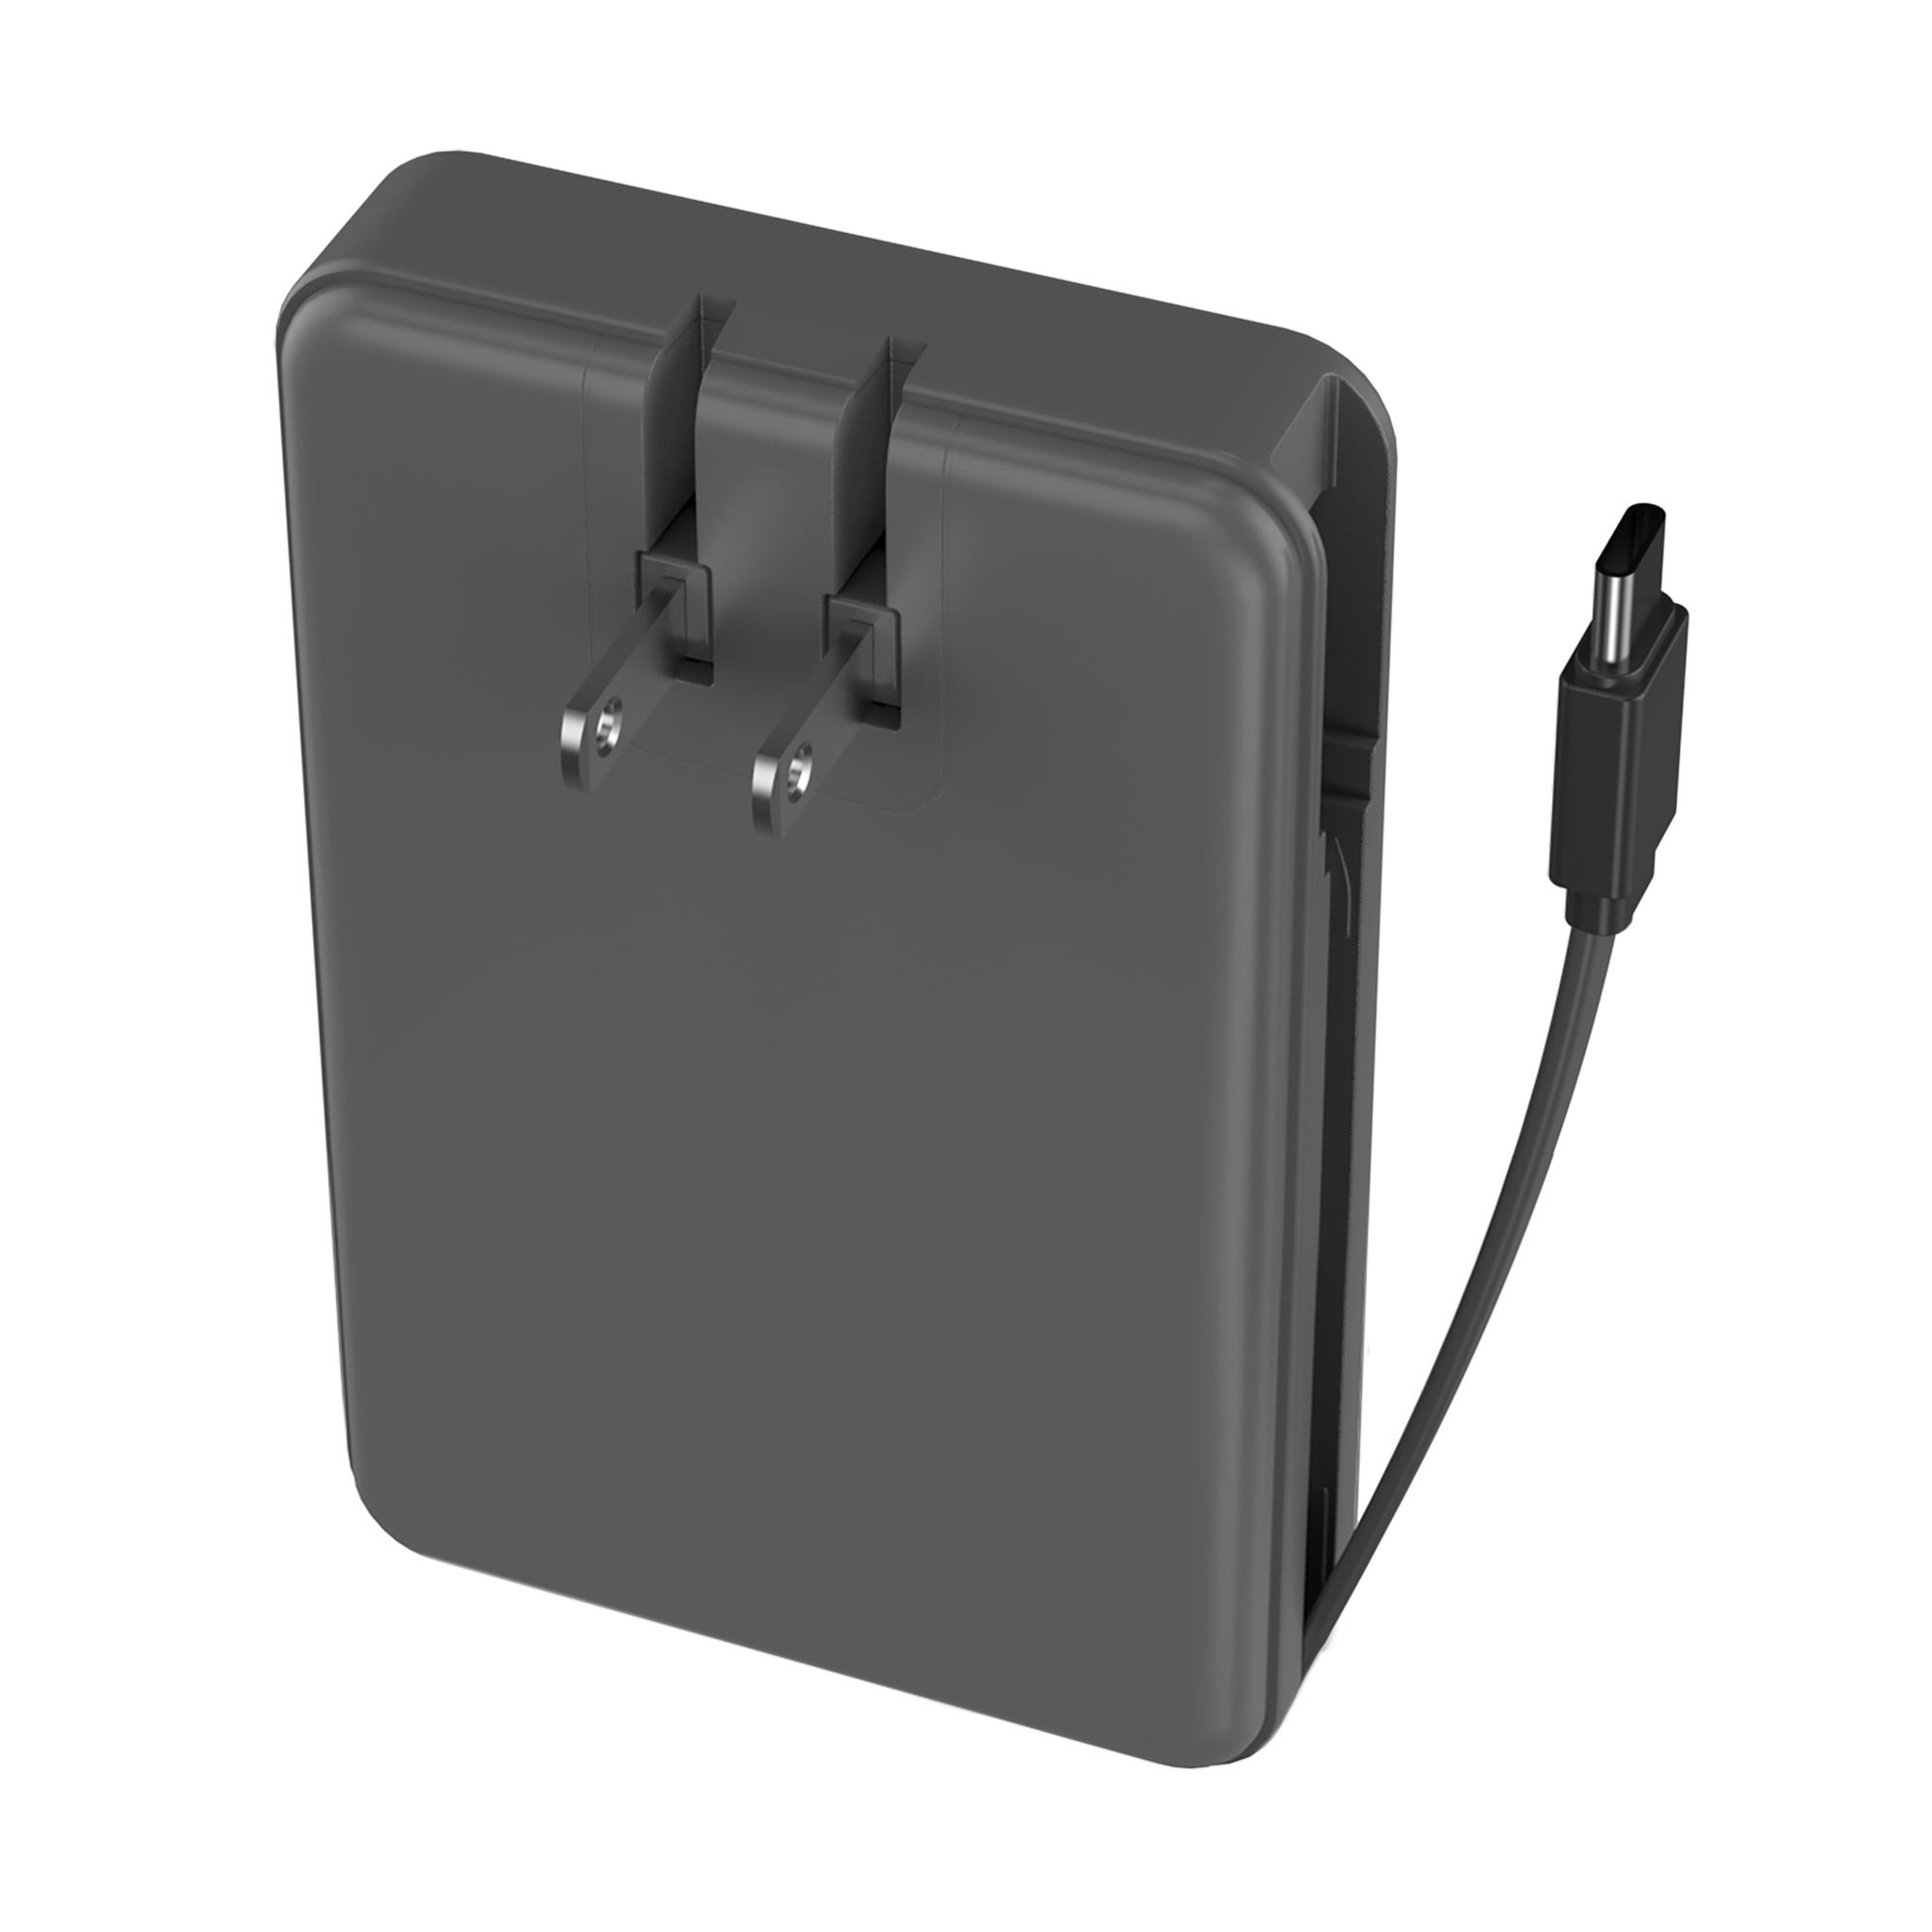 Amp Prong Portable Charger w/ Built-in USB-C Cable & Wall Plug